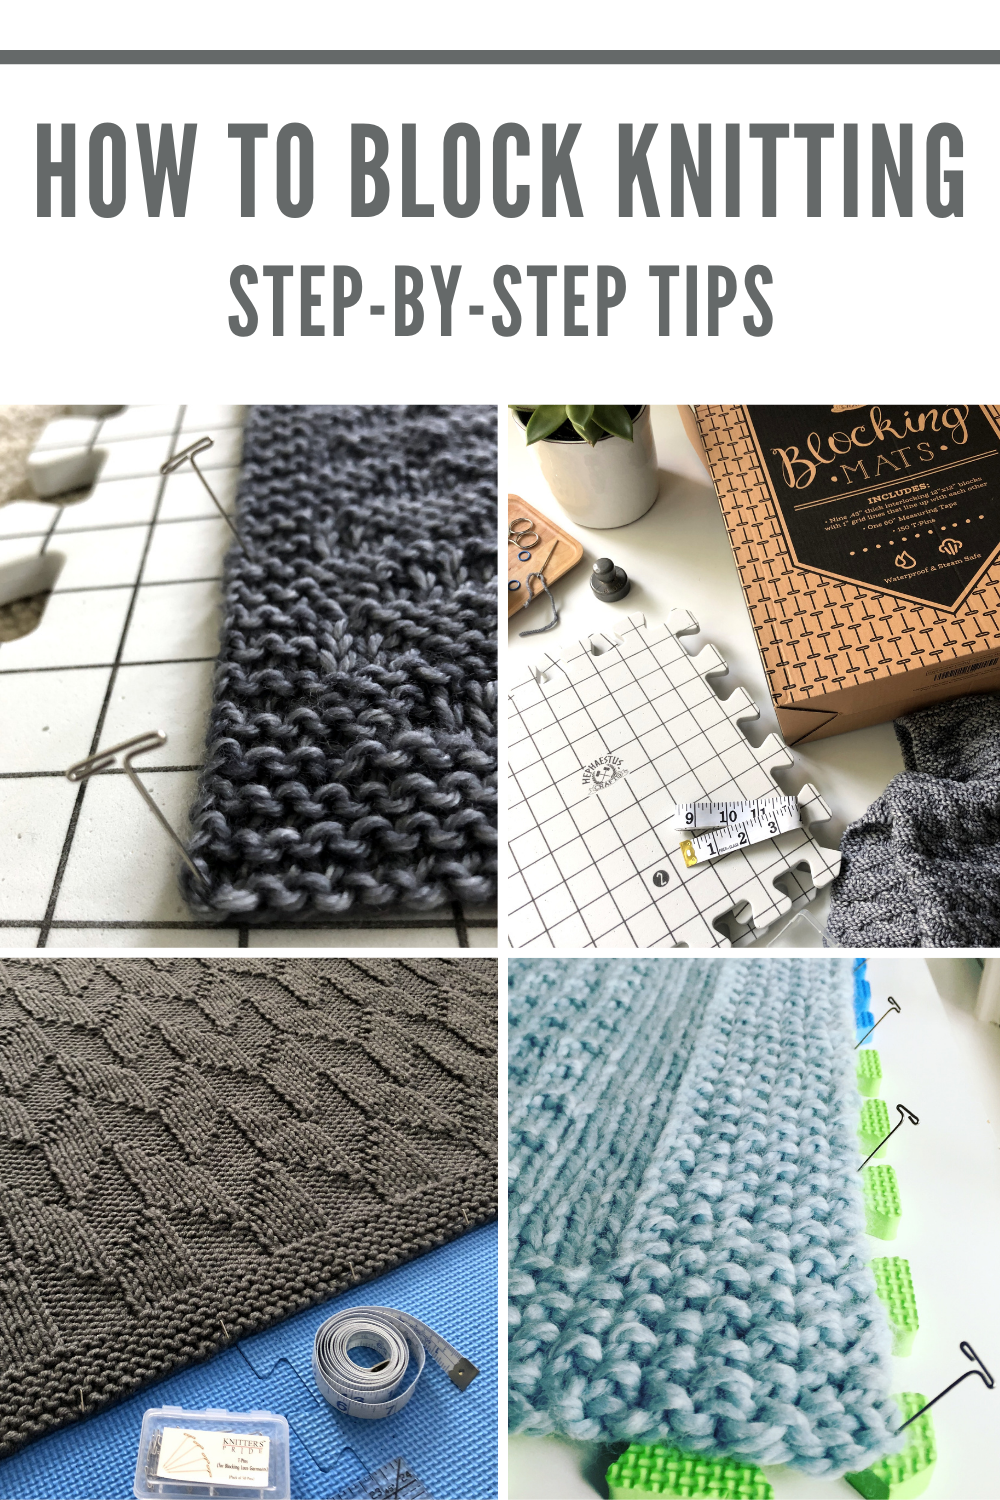 How to Block Knitting - Blocking a Hand Knit Blanket Tutorial - Final Step  of Knitting Project — Fifty Four Ten Studio